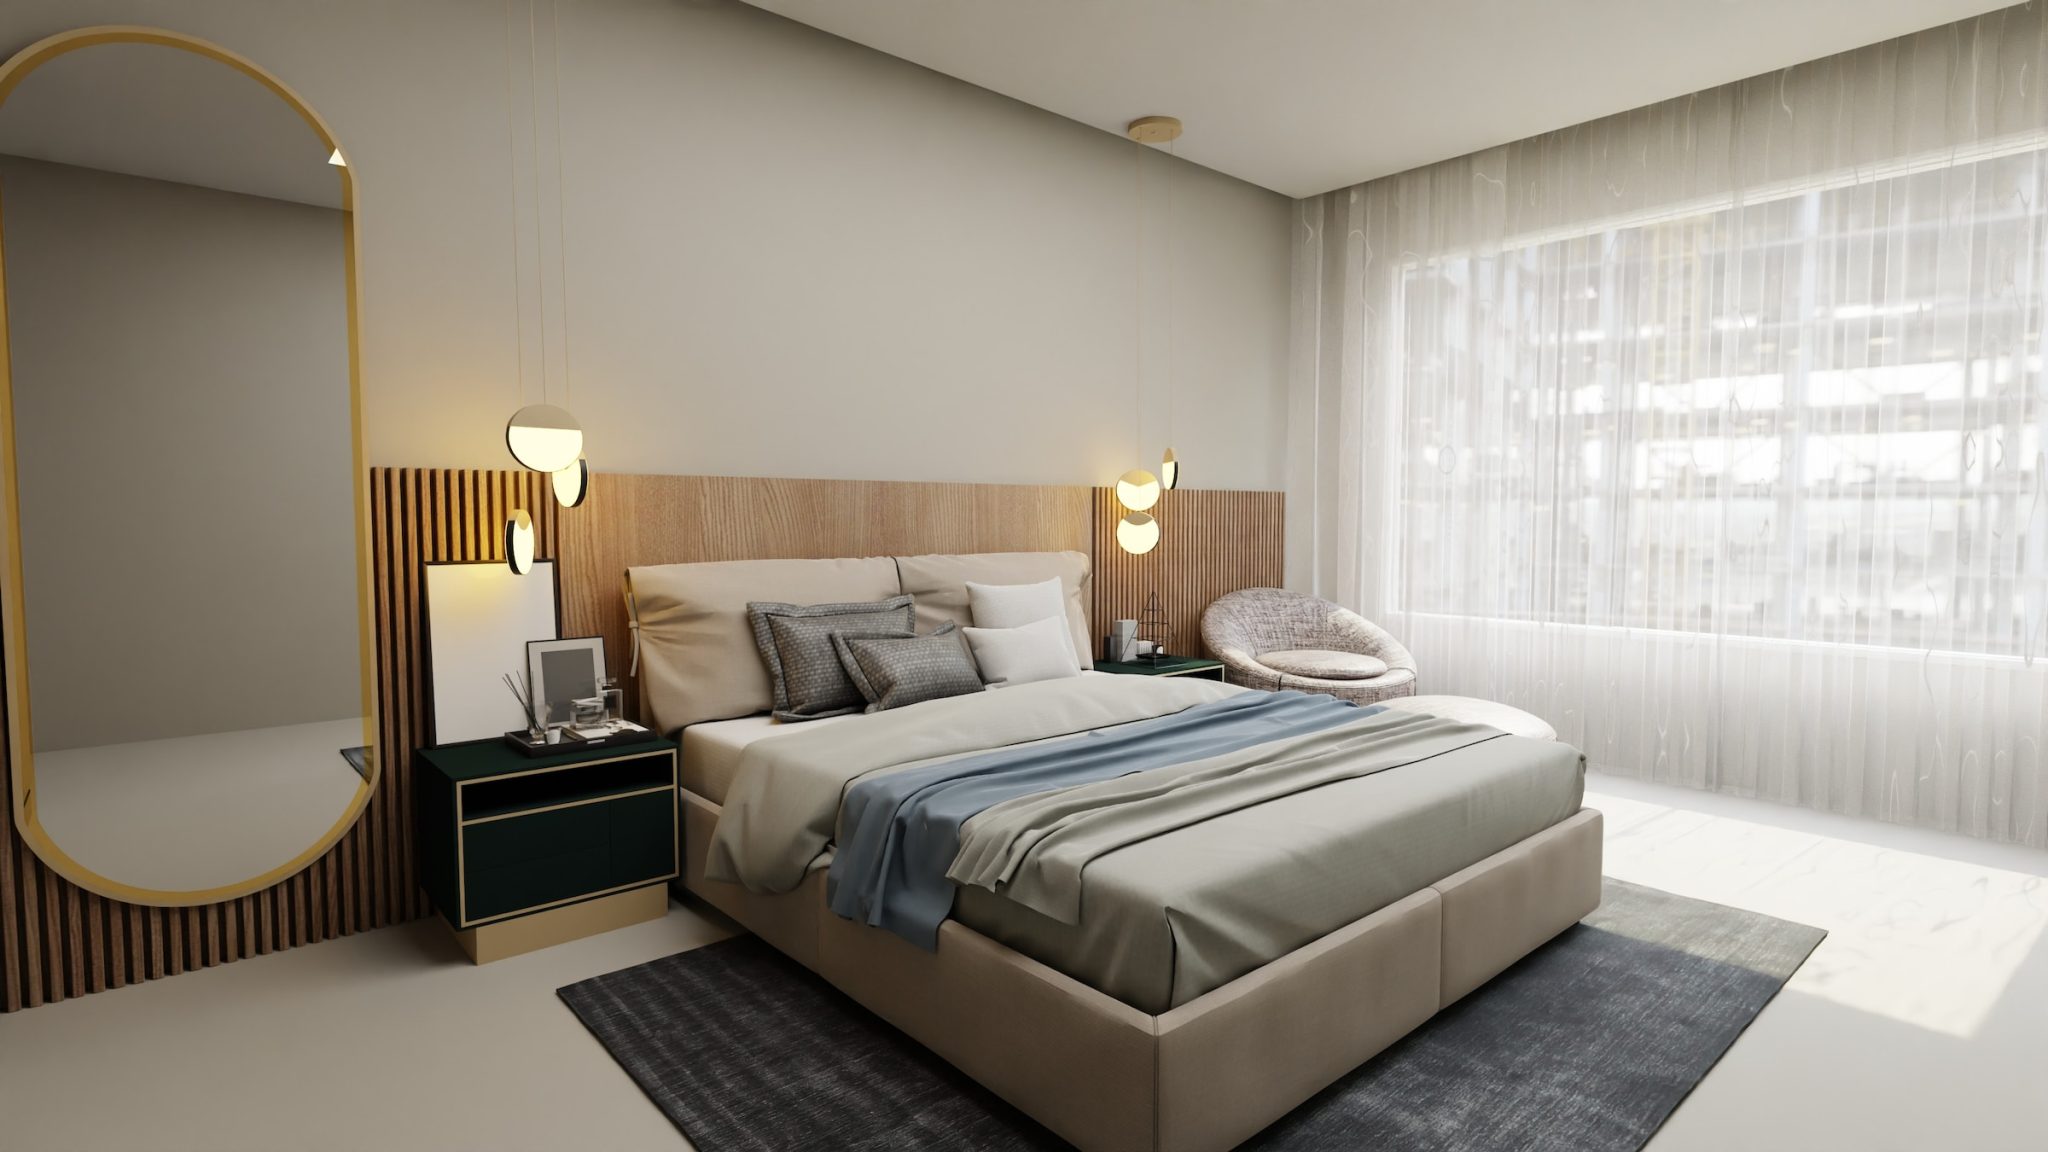 How contract beds ensure comfort for hotel guests